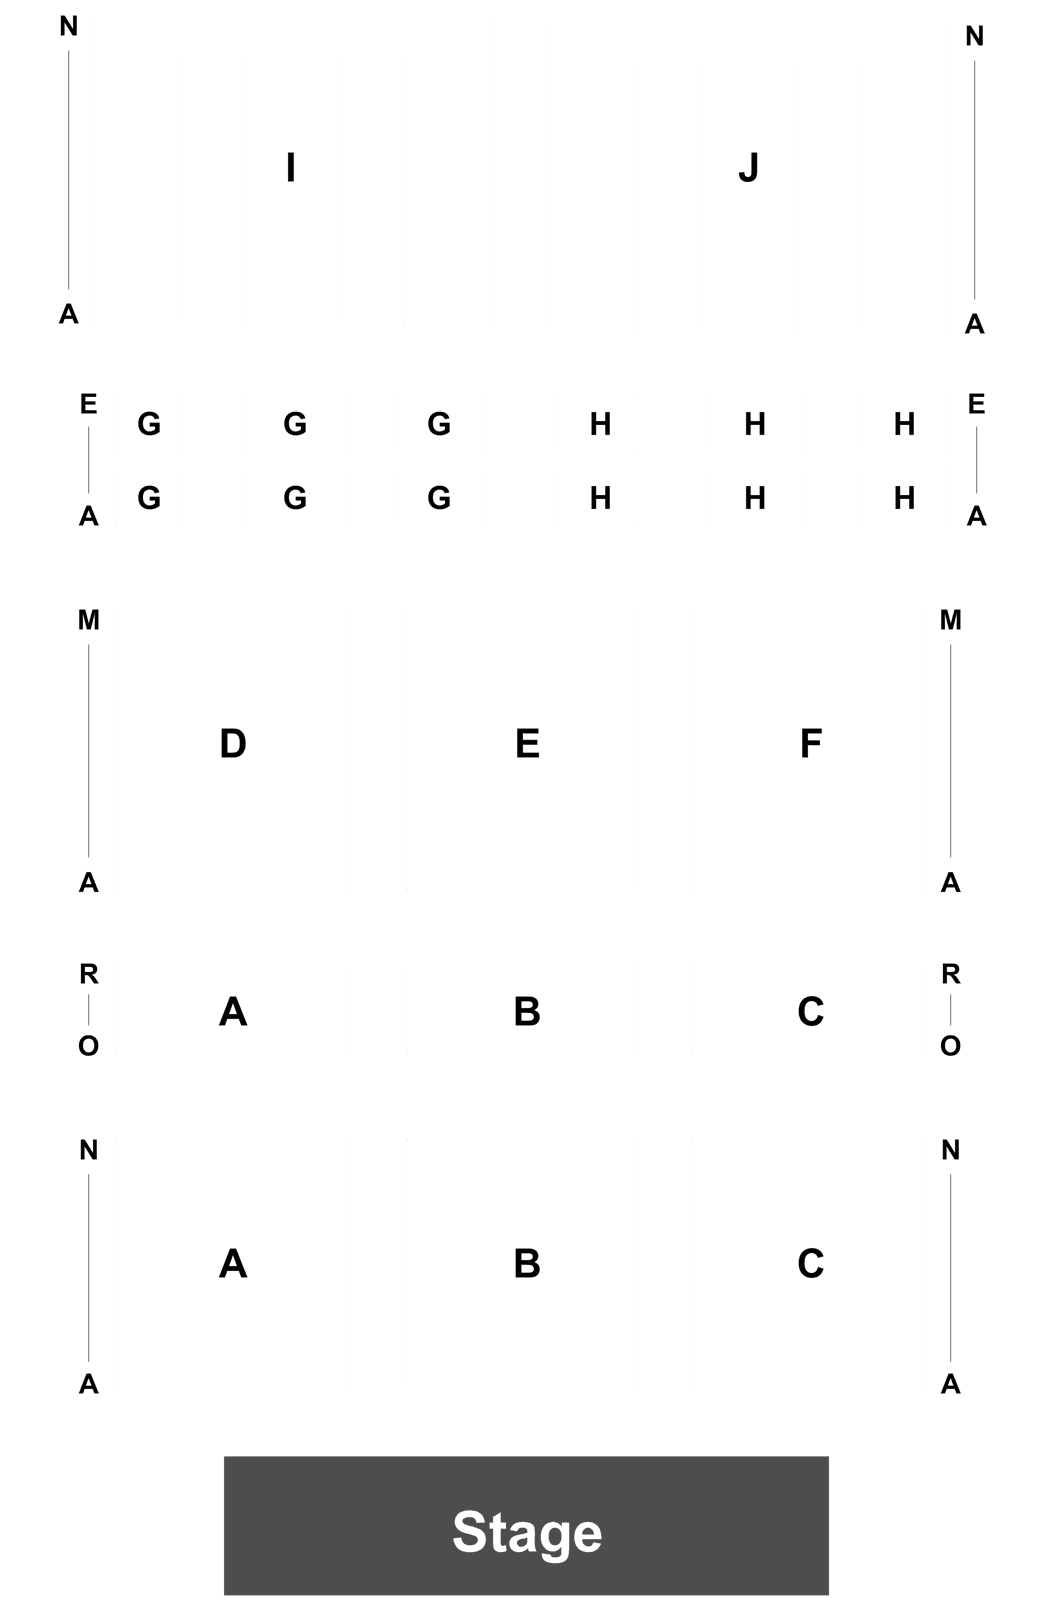 Firekeepers Casino Event Seating Chart